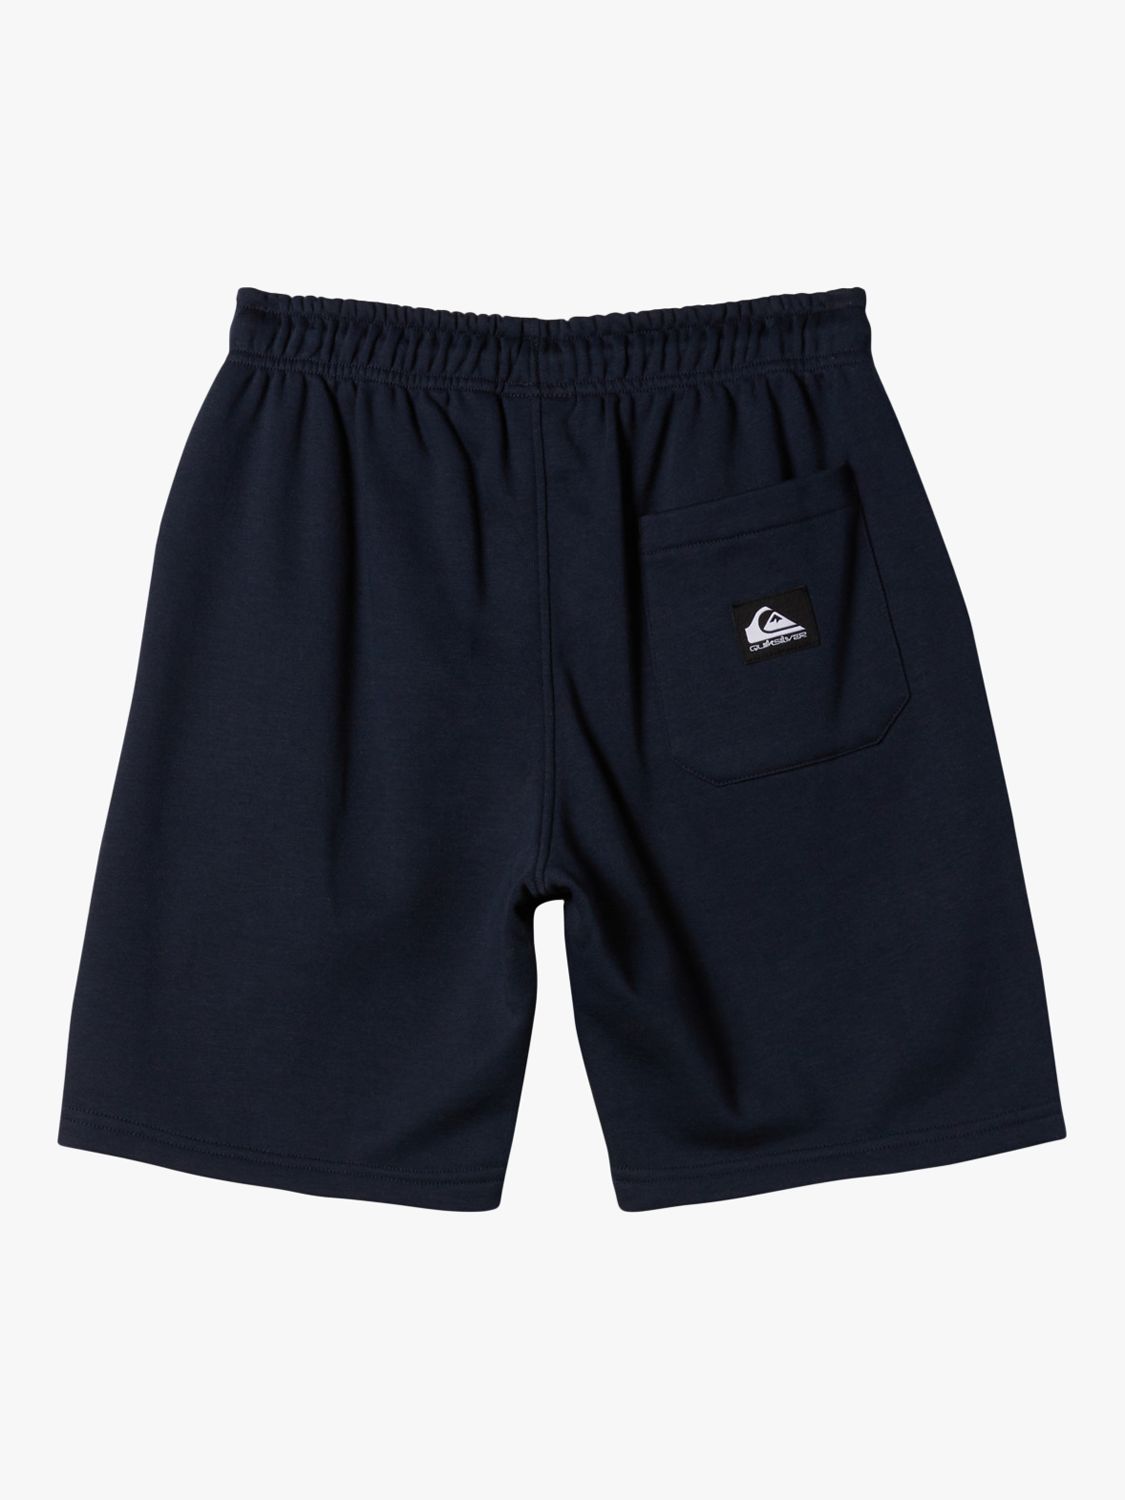 Quiksilver Kids' Easy Day Logo Jogger Shorts, Navy, 16 years